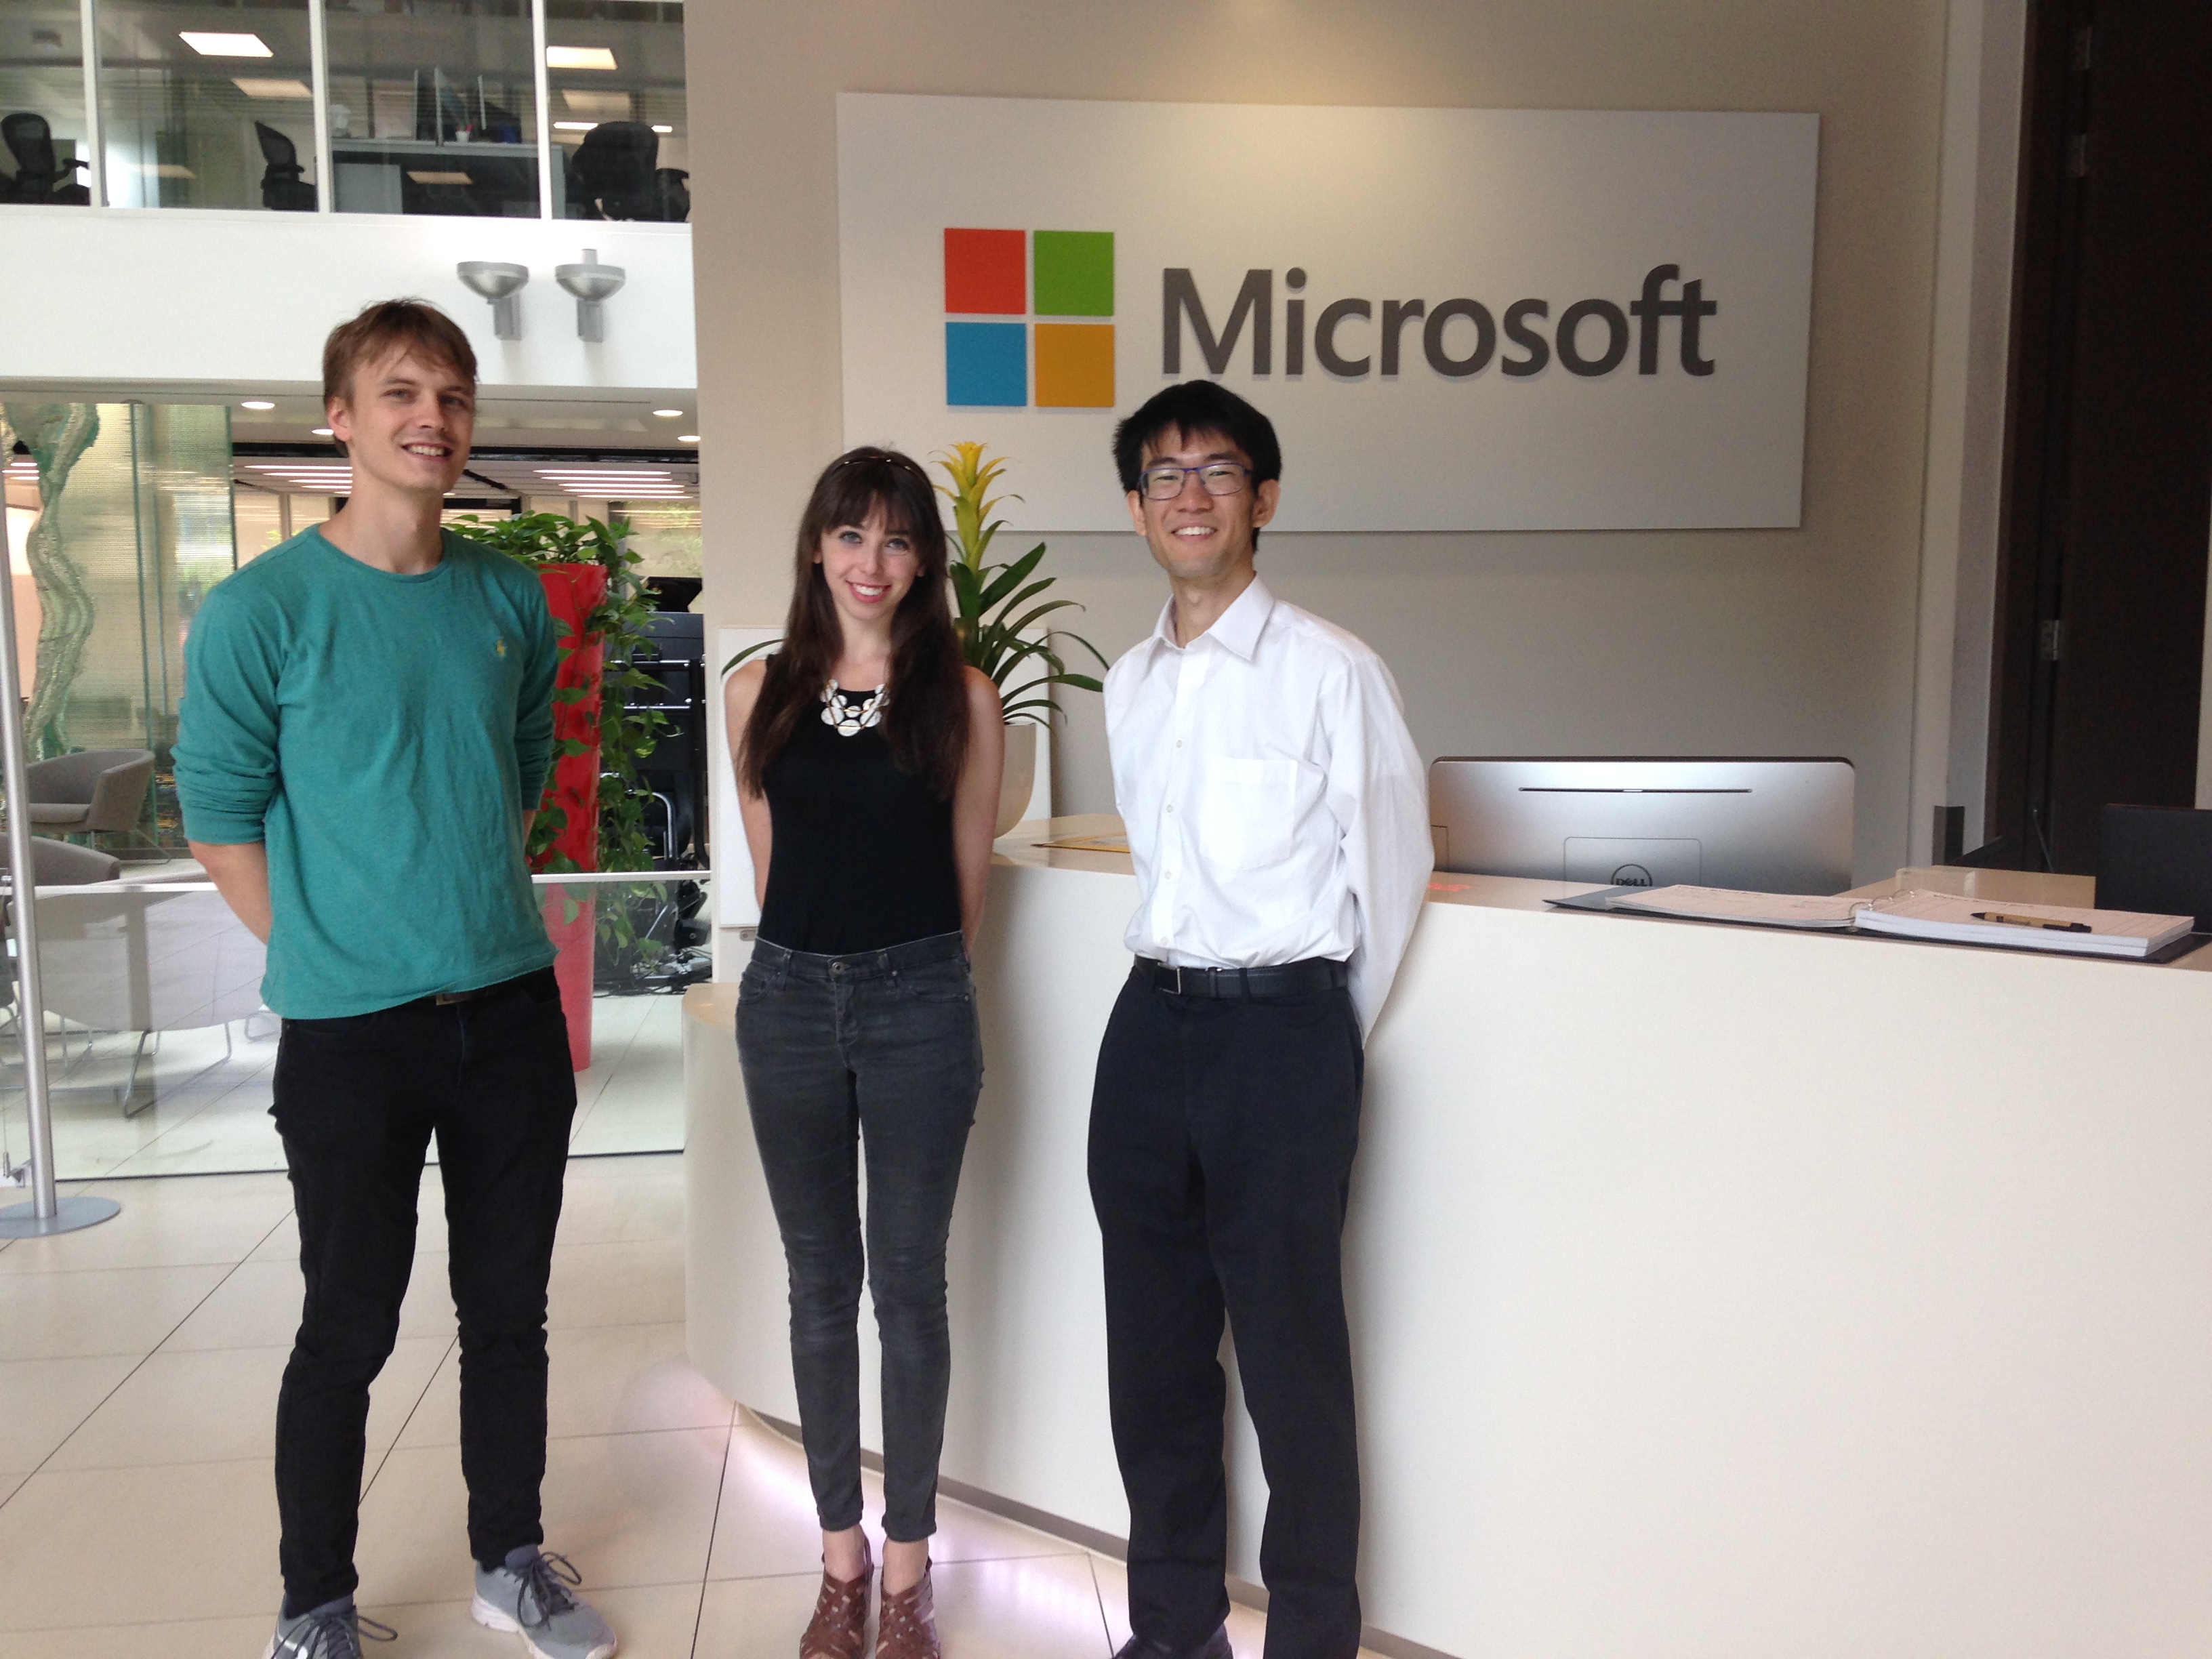 Michaela and two others at Microsoft